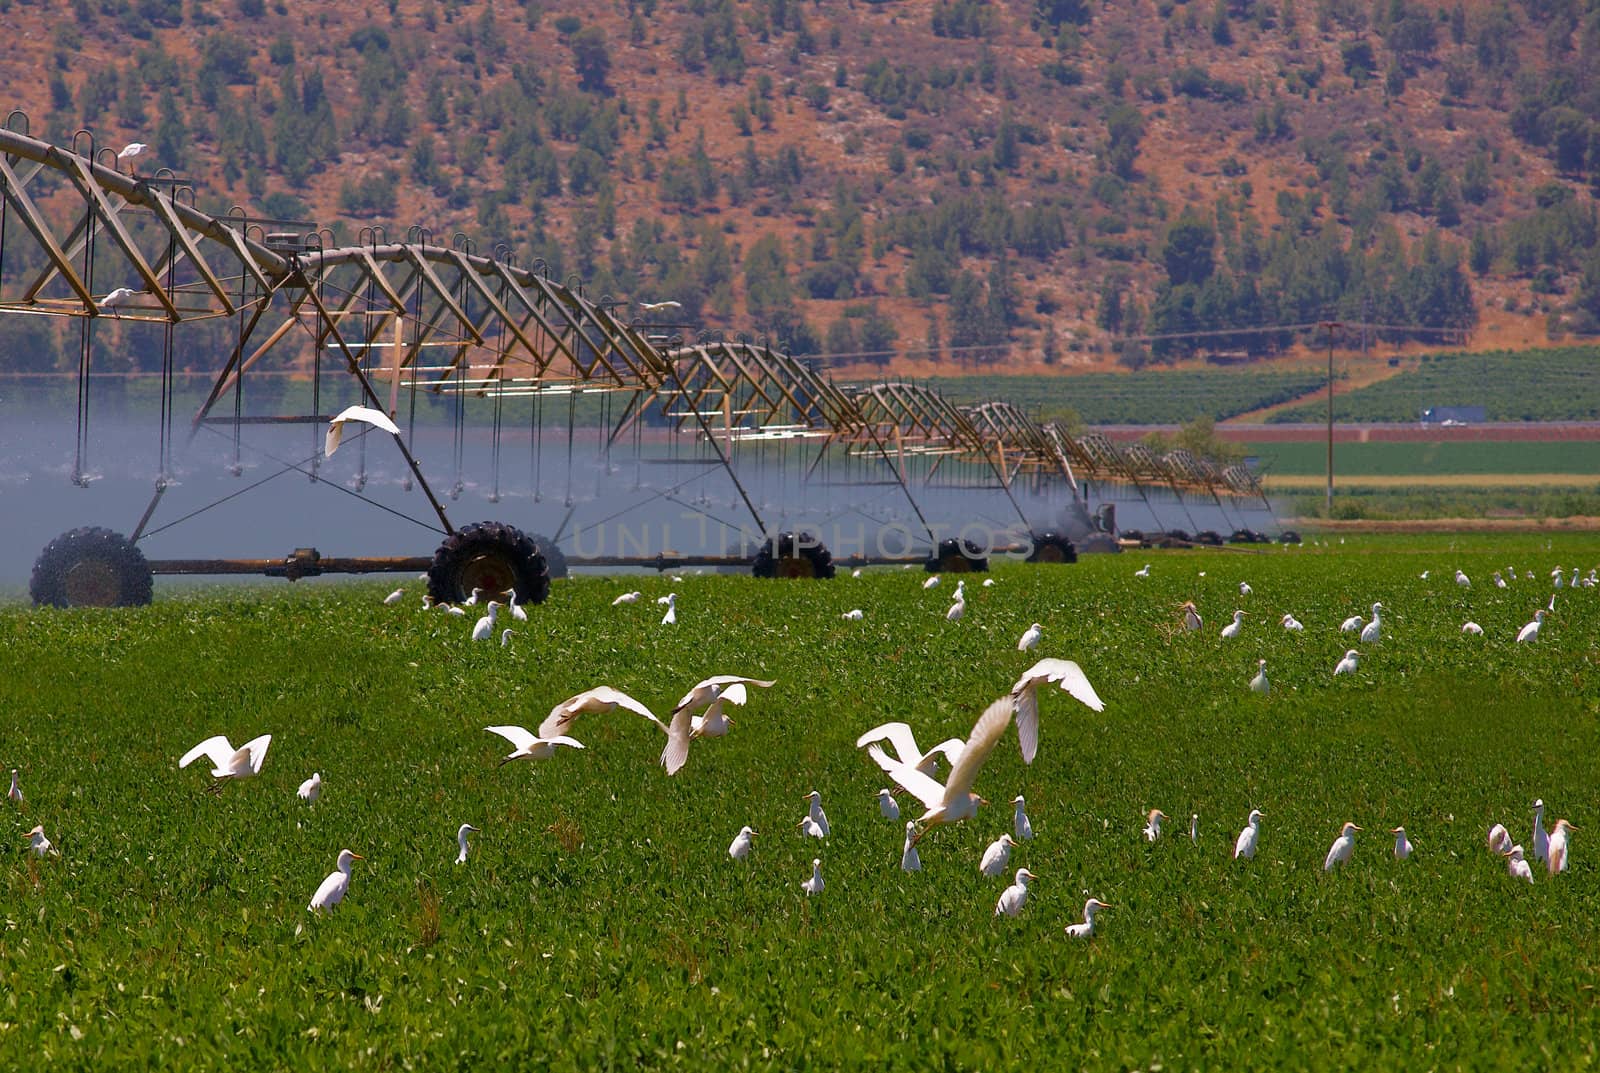 Consolidated Irrigation of the field. A flock of migratory birds in the field.